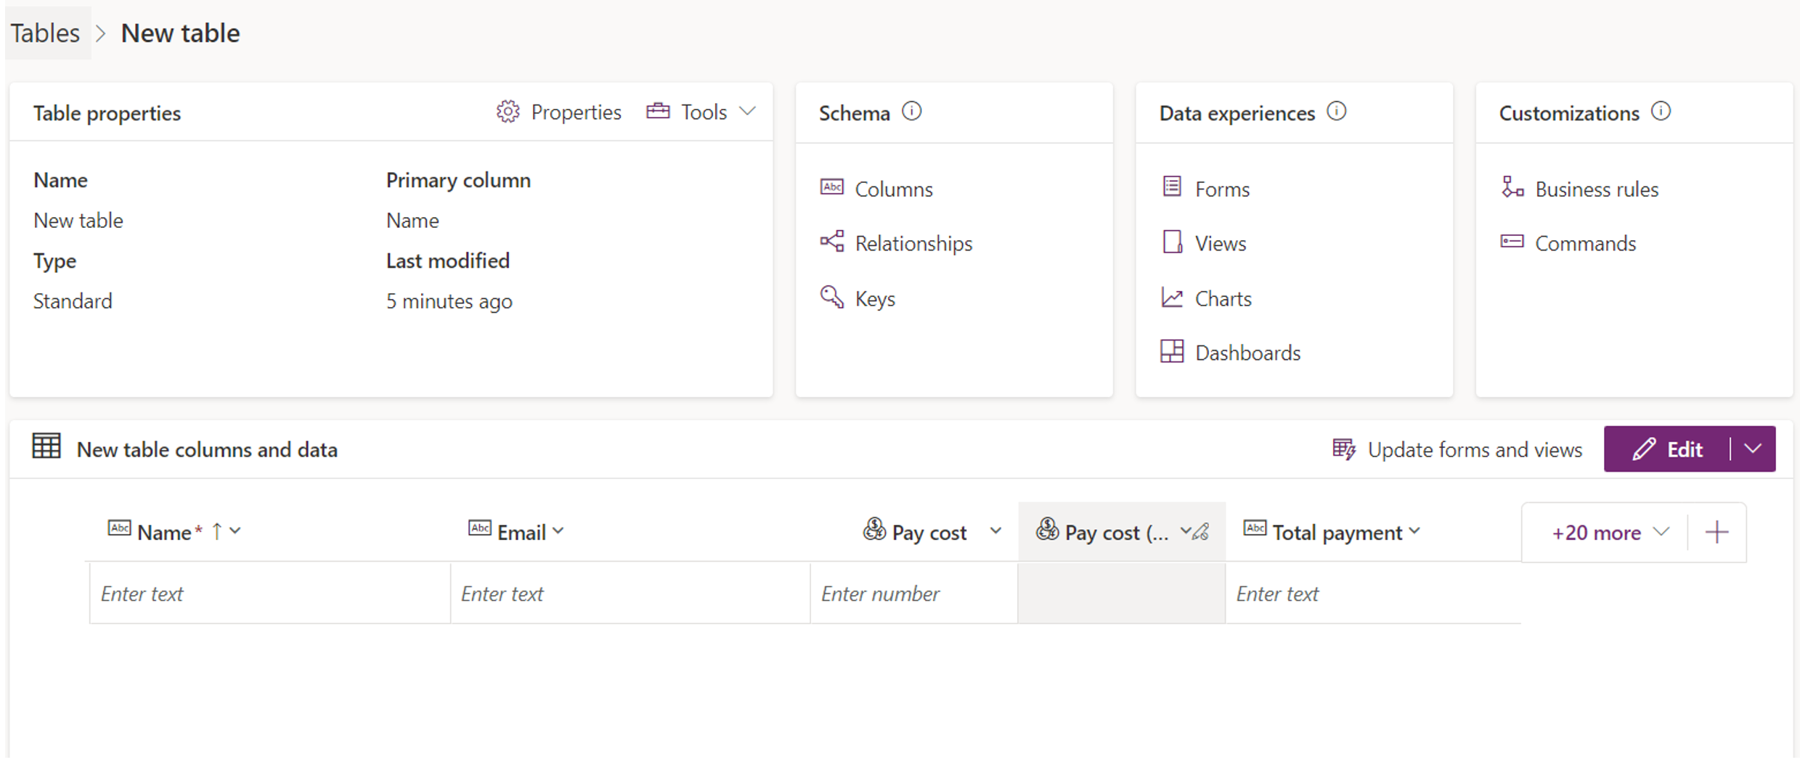 An image showing how to build a data table in Power Apps.